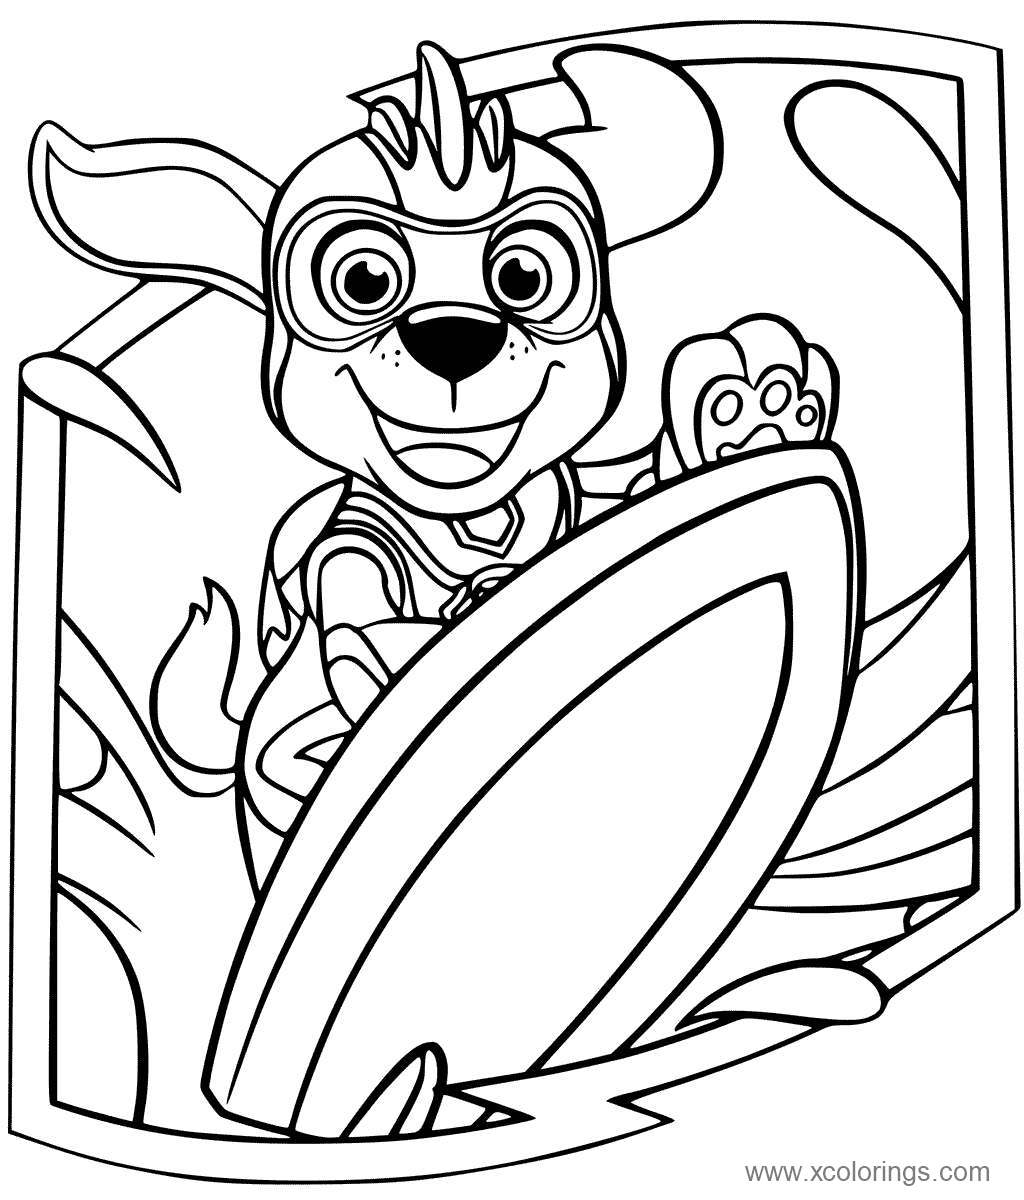 Free Paw Patrol Mighty Pups Zuma Coloring Pages printable